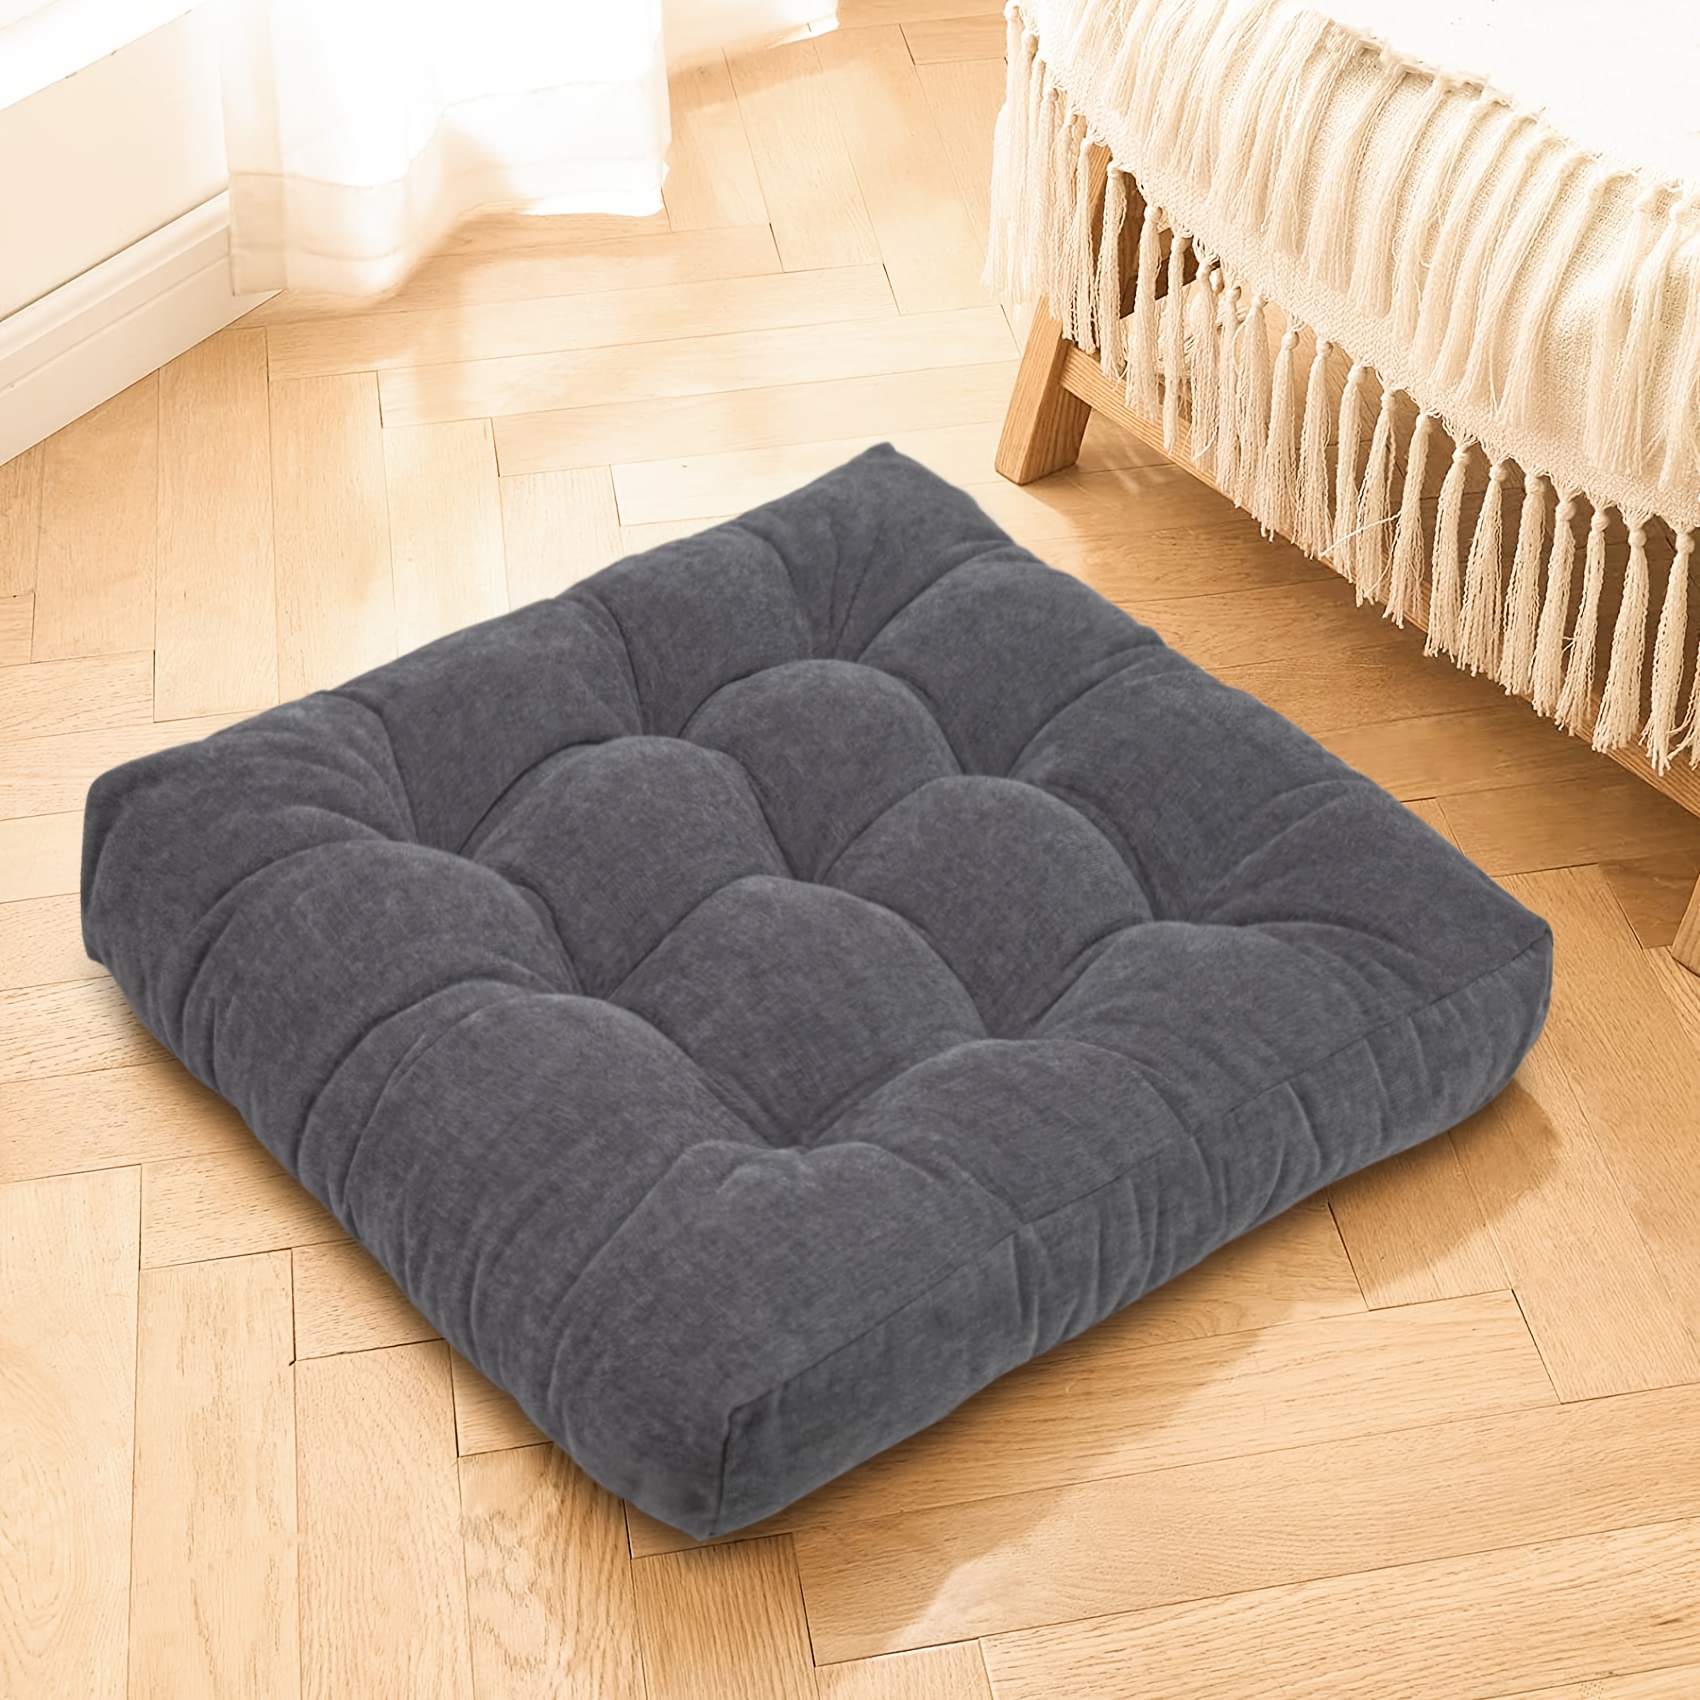 Floor Pillows Meditation Cushion Thicken Tufted Cushion Sitting Pillows for  The Floor Solid Square Seat Cushion Tufted Floor Cushions Meditation